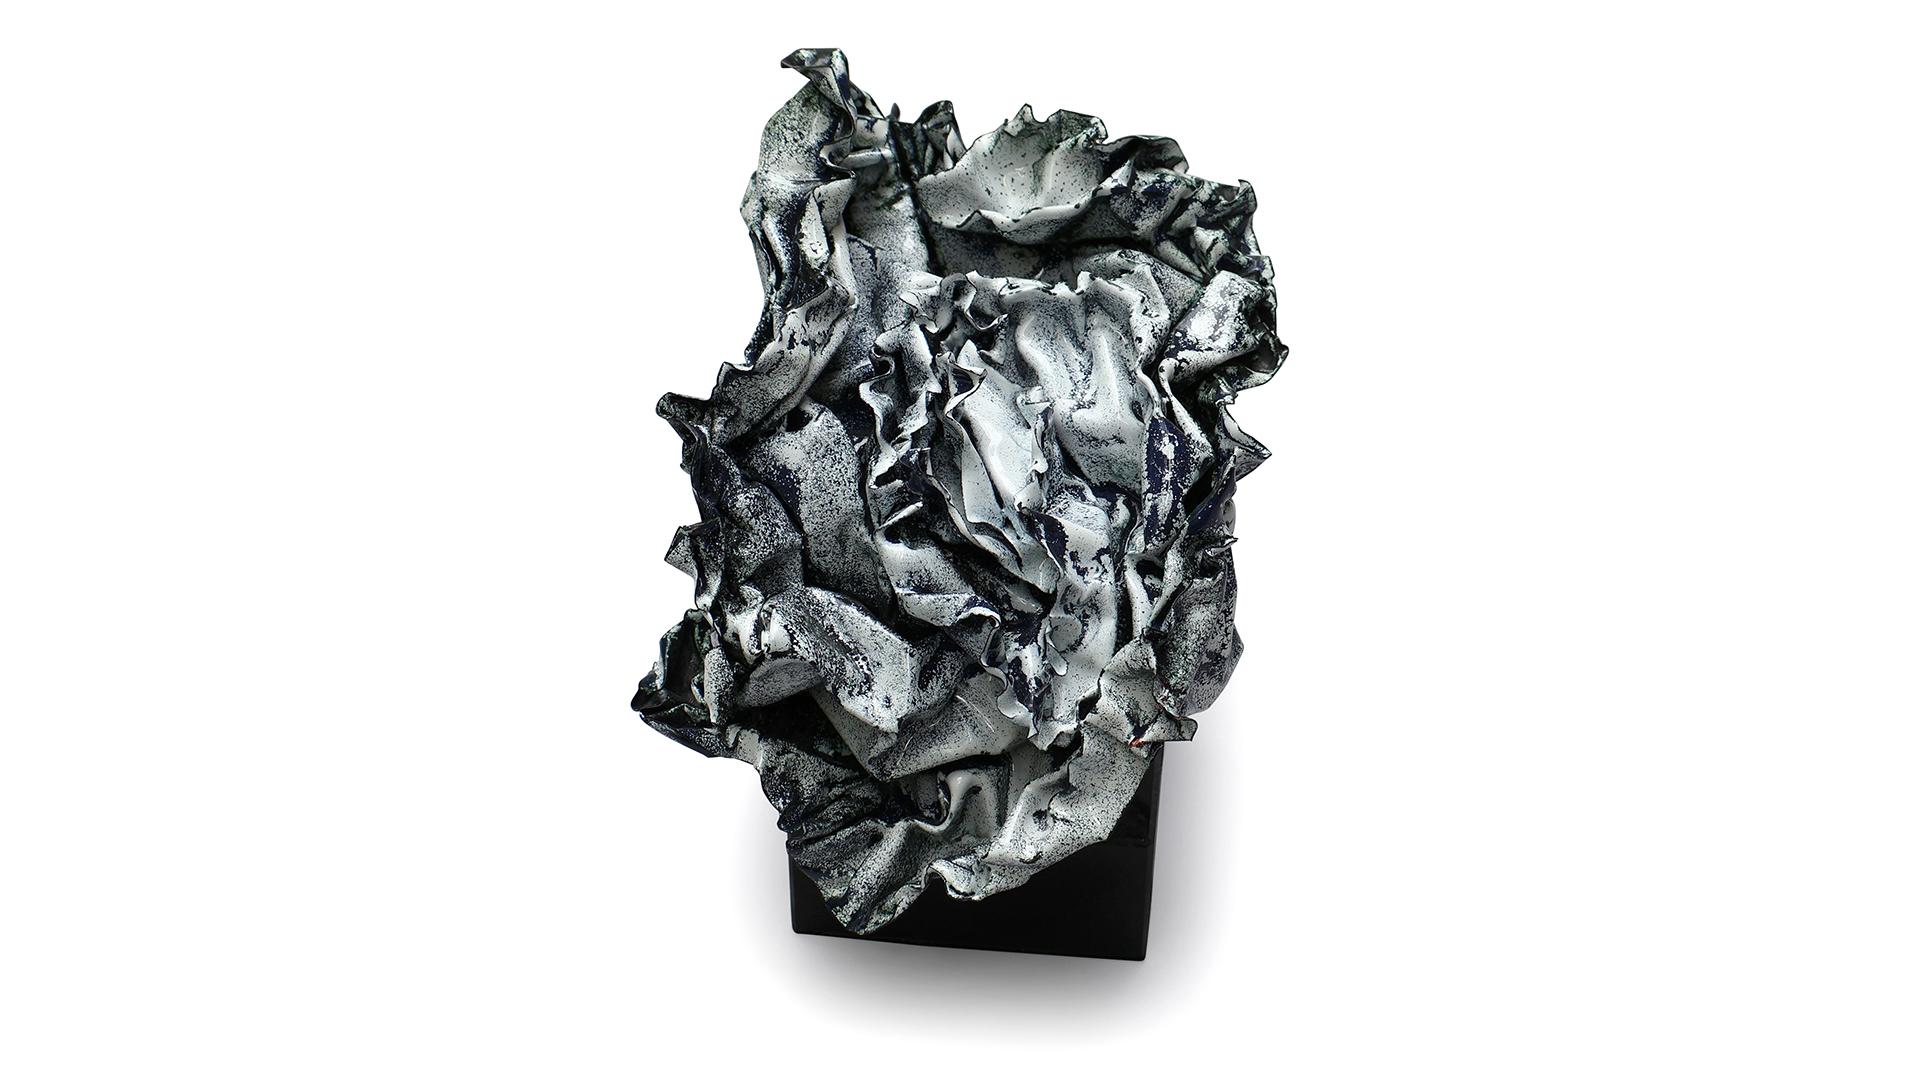 This black and white sculpture, titled 